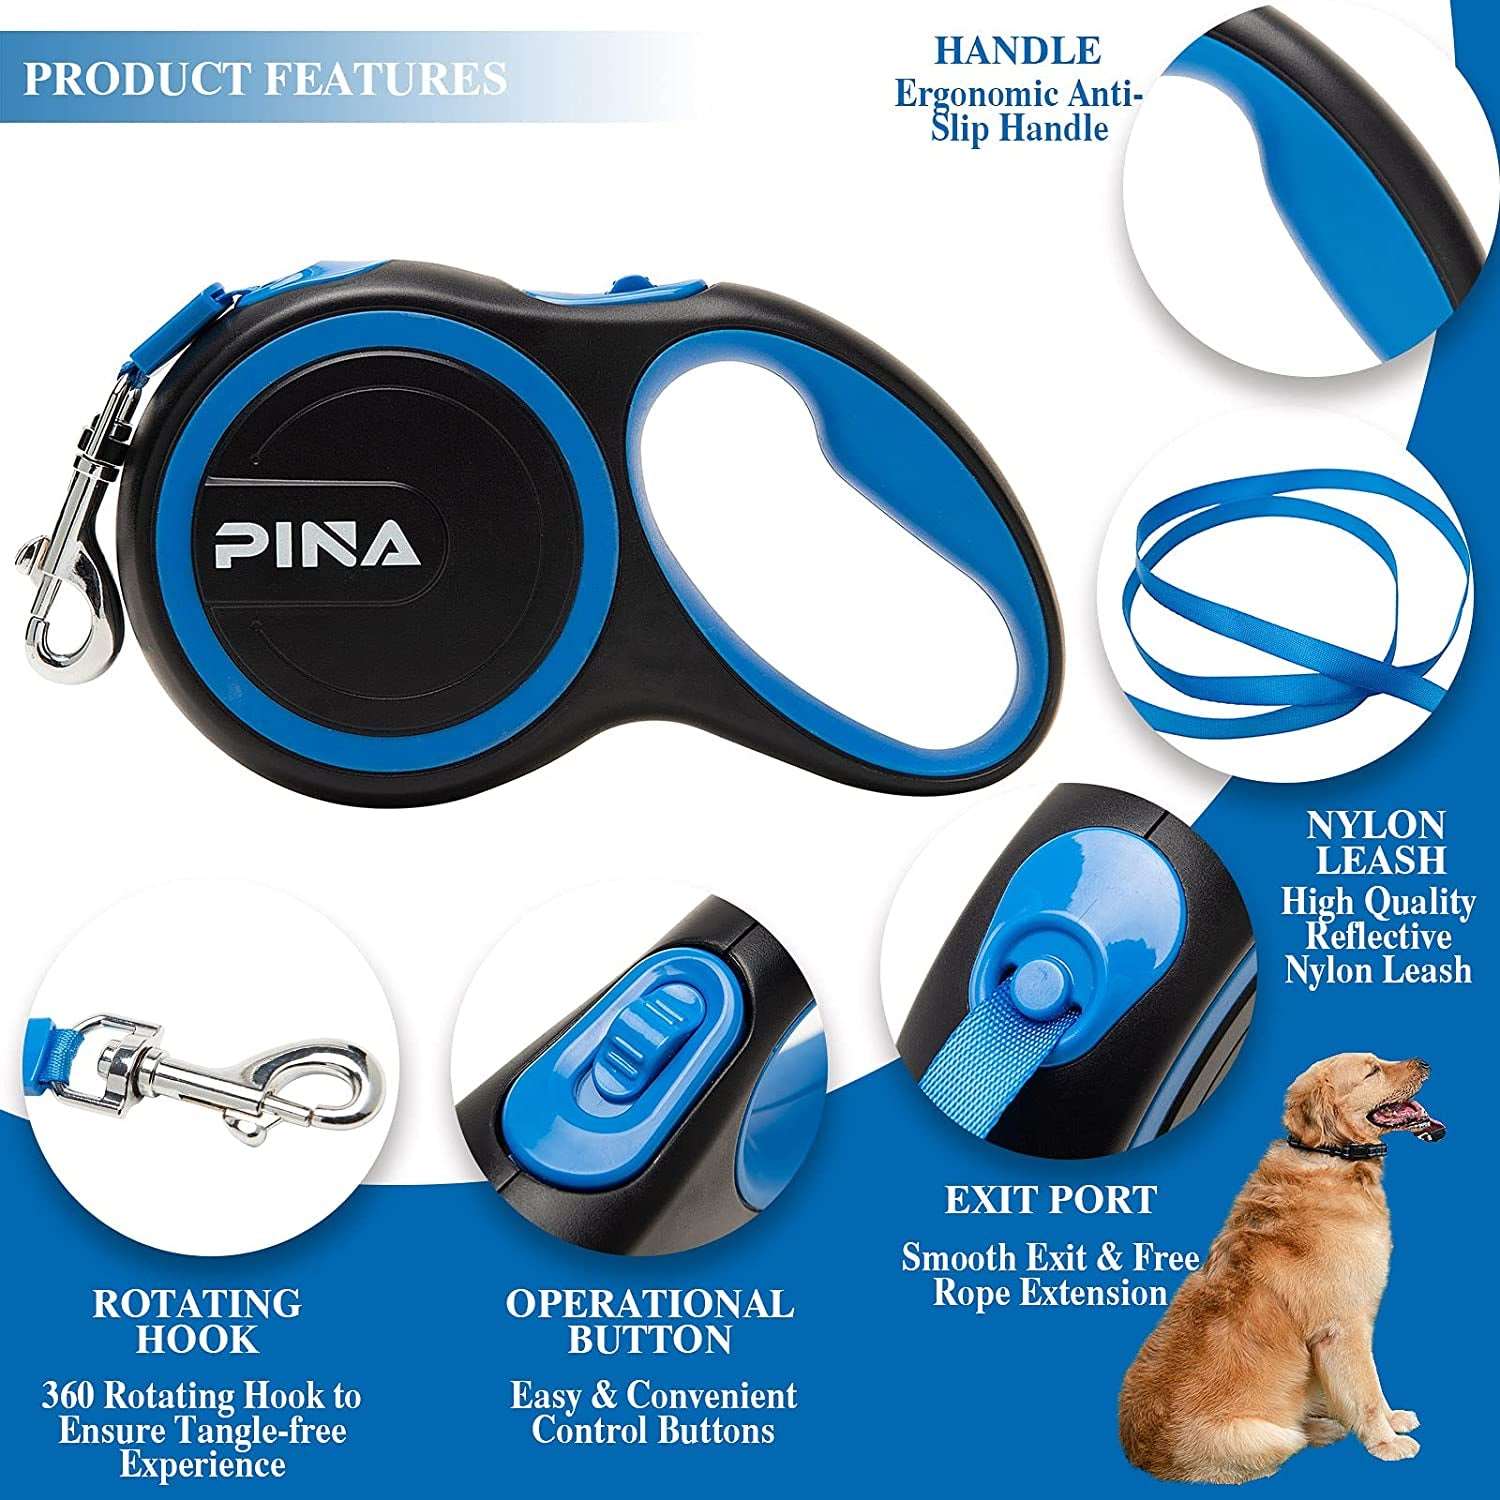 Retractable Dog Leash, Tangle-Free Strong Reflective Nylon Tape, with Anti-Slip Handle, One-Handed Brake, Pause, Lock - Black Blue